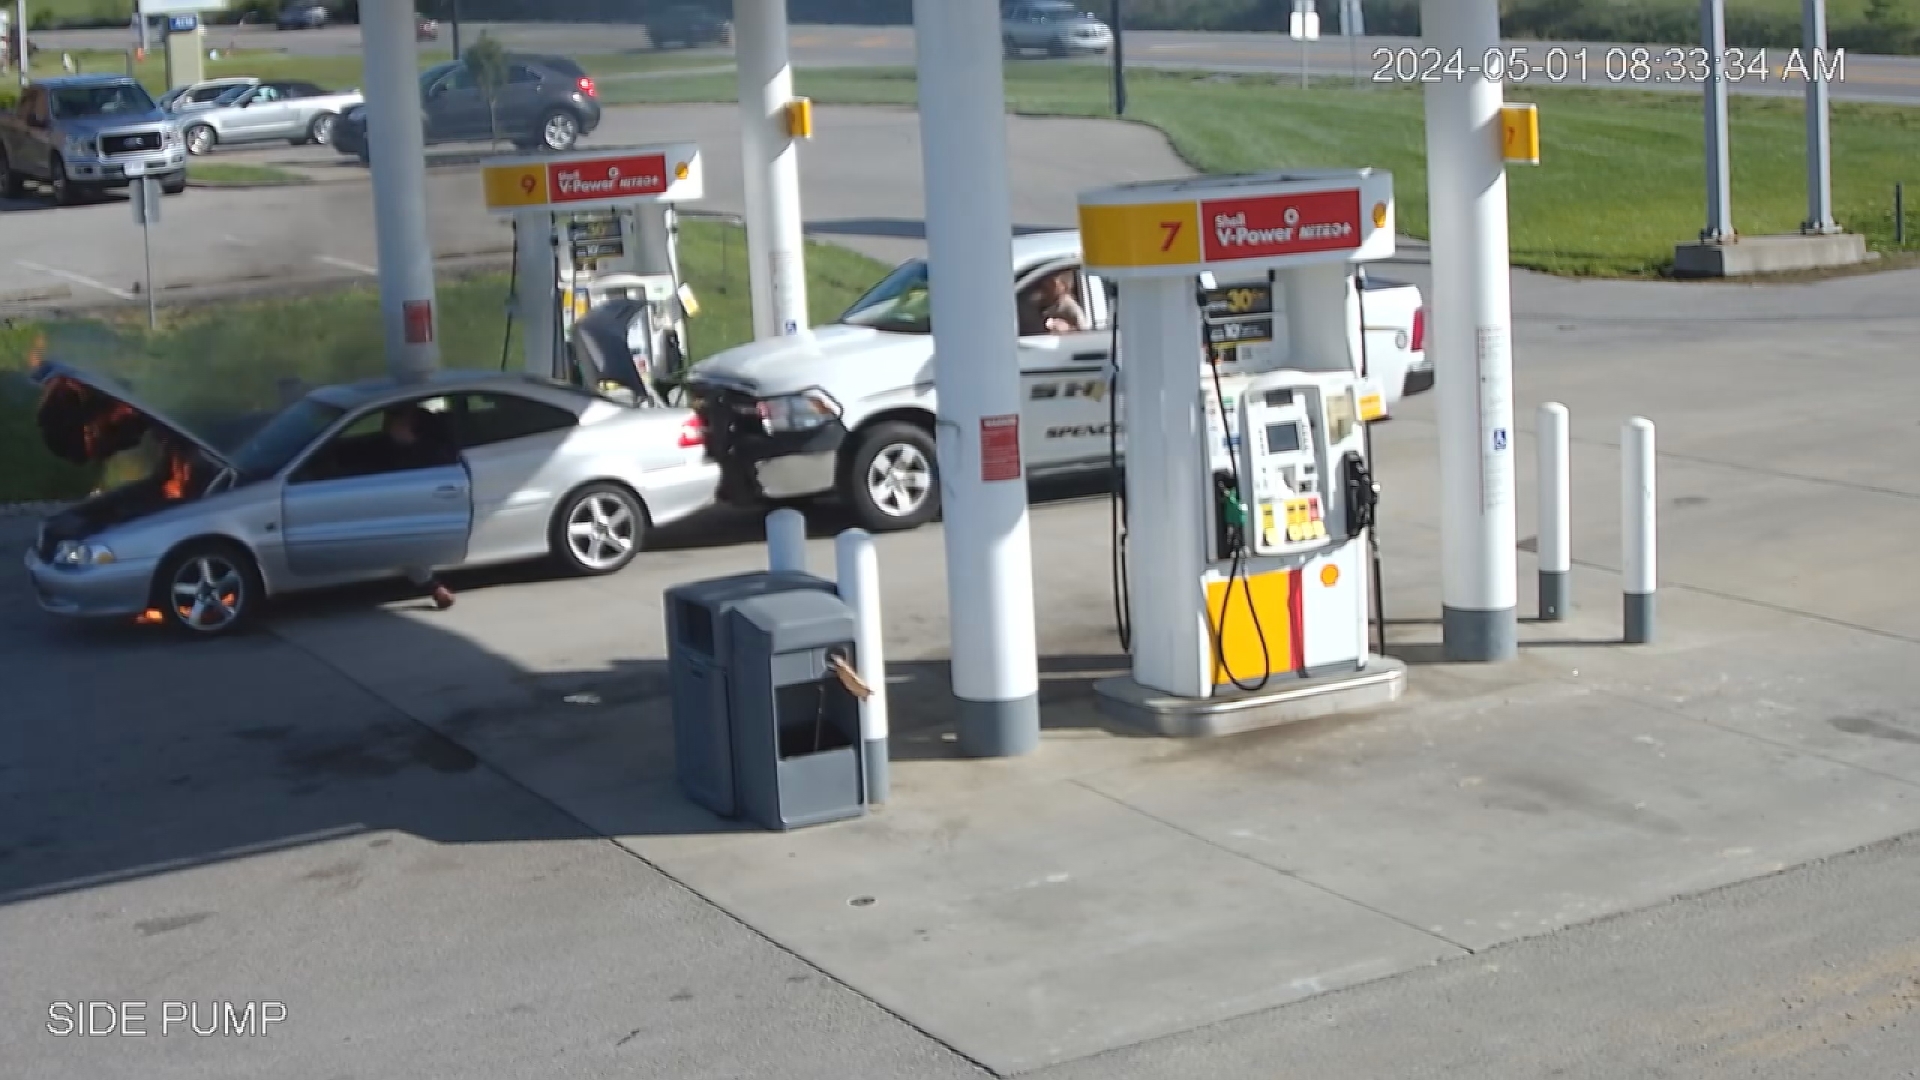 A Spencer County Sheriff's Deputy pushed a burning car away from gas pumps at Cricket's gas station in Fisherville, Kentucky. | May 1, 2024